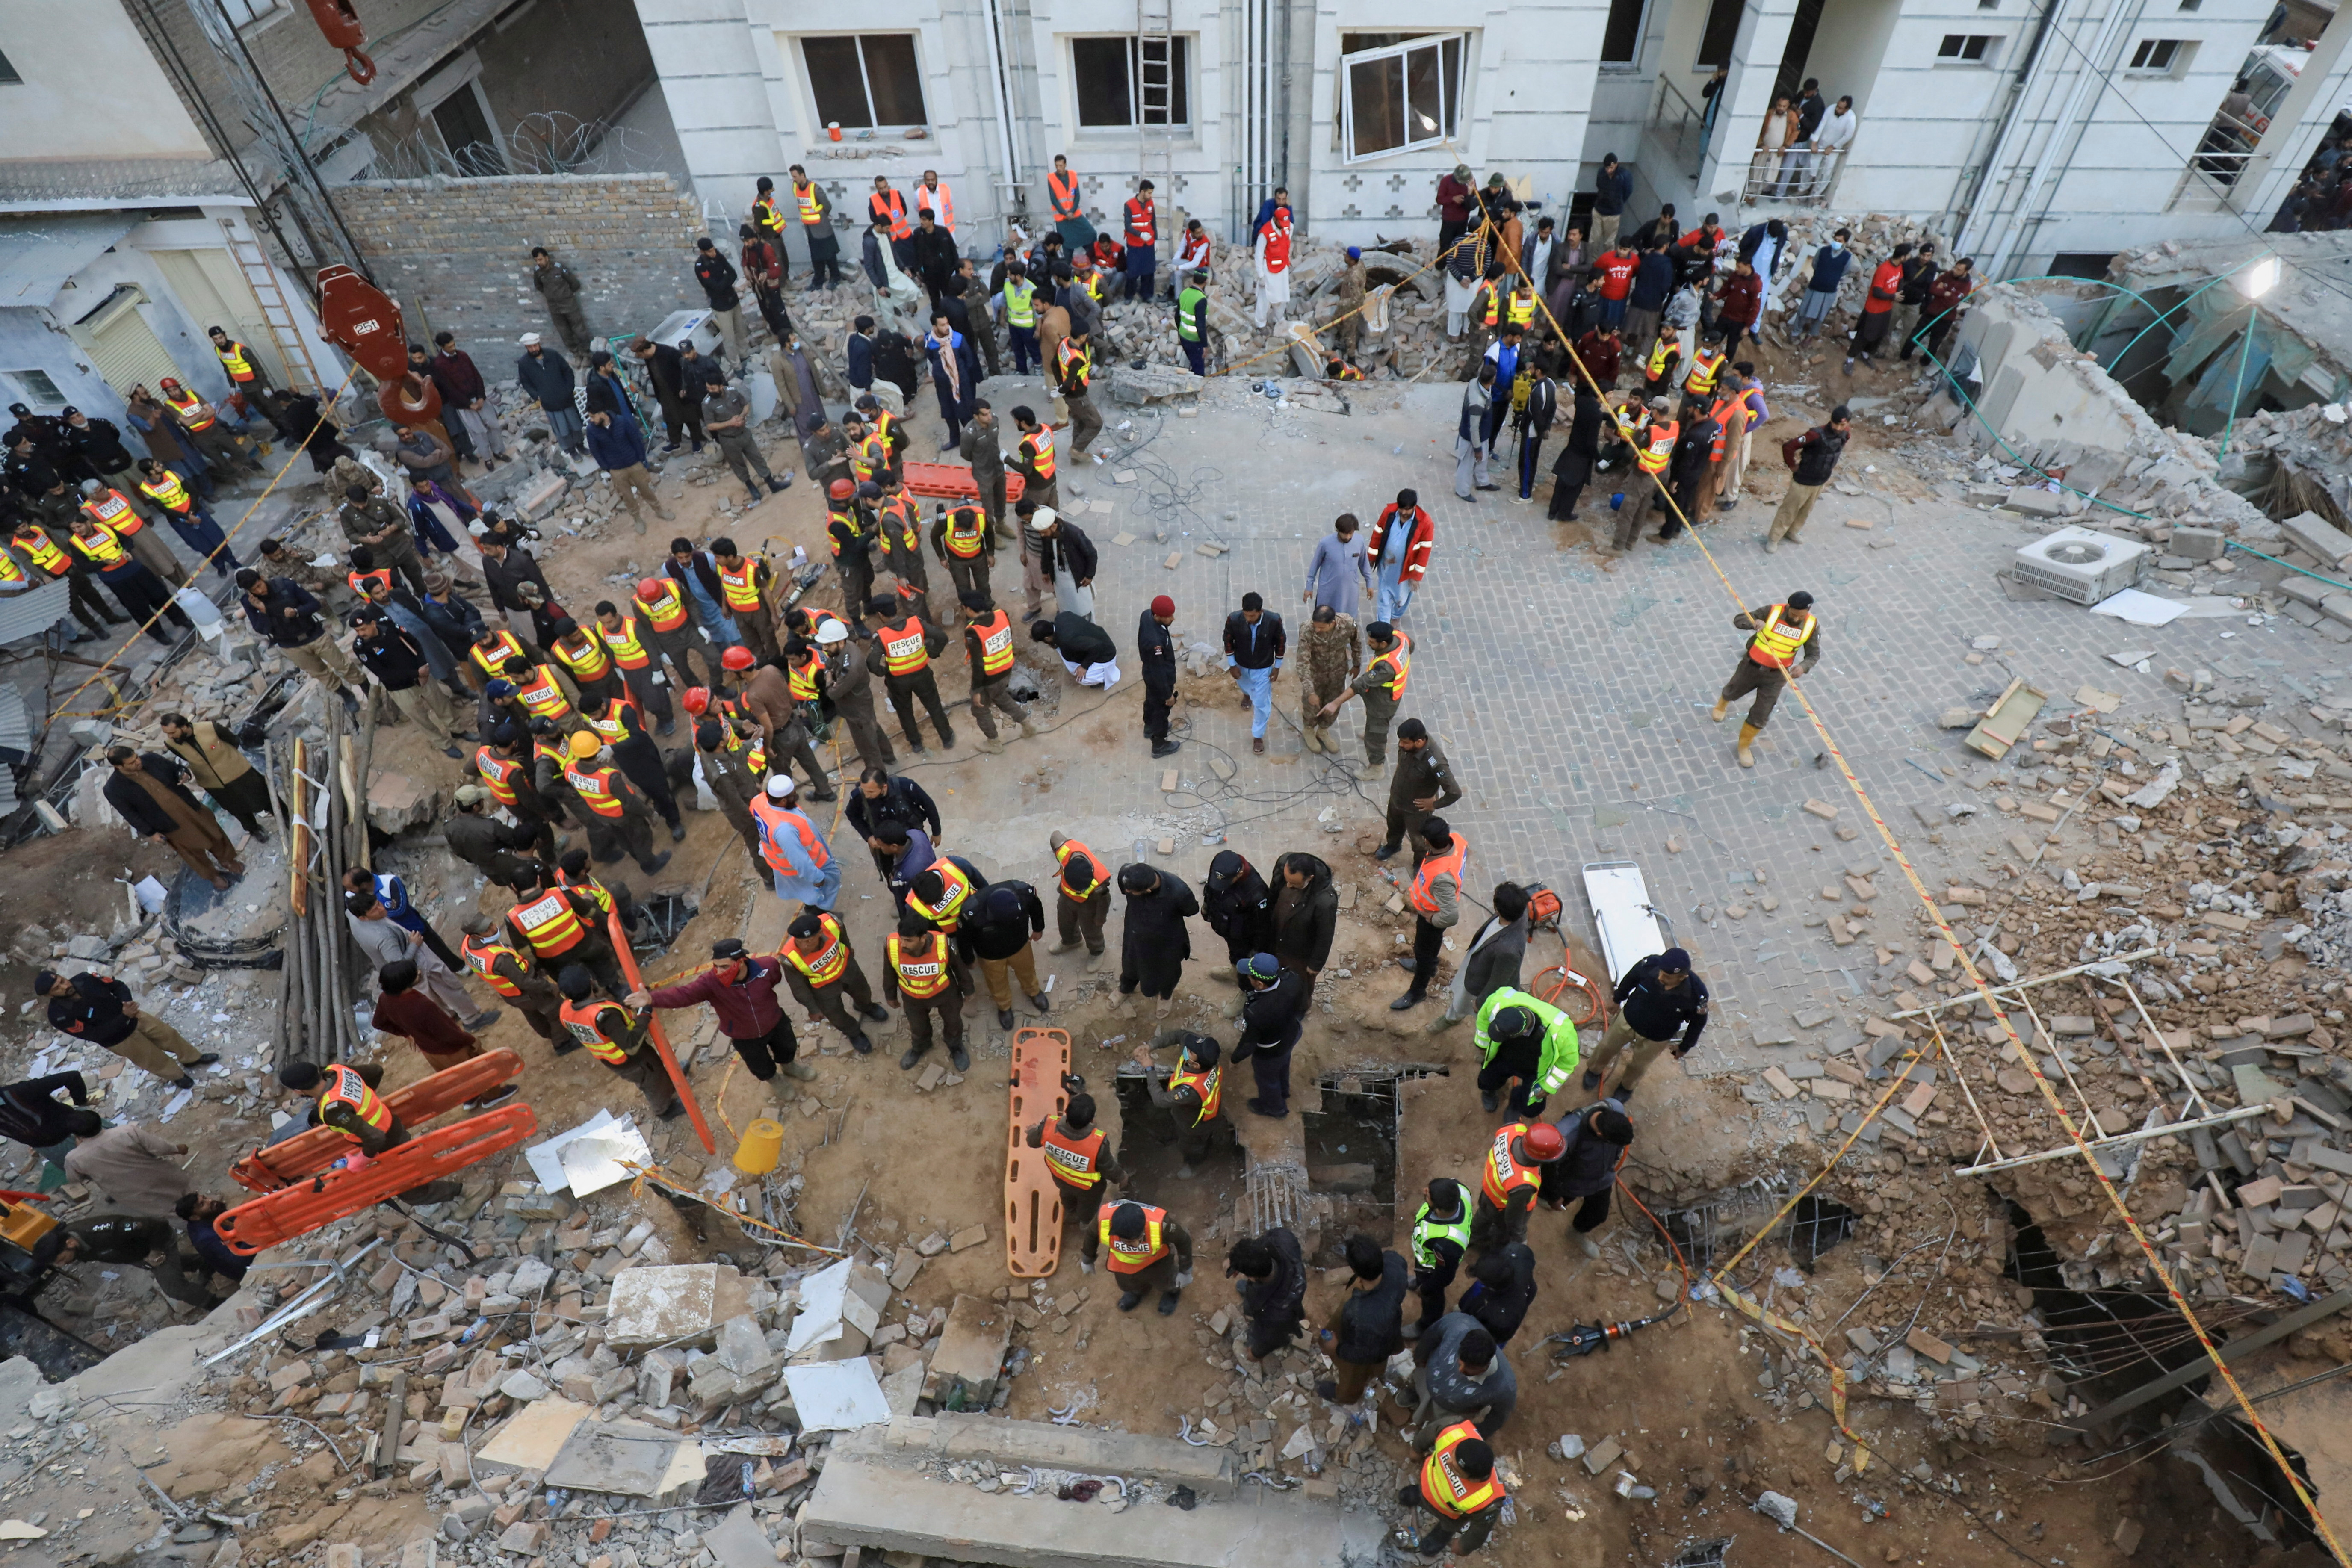 Rescue workers are searching for survivors after a suicide blast in a mosque in Peshawar.